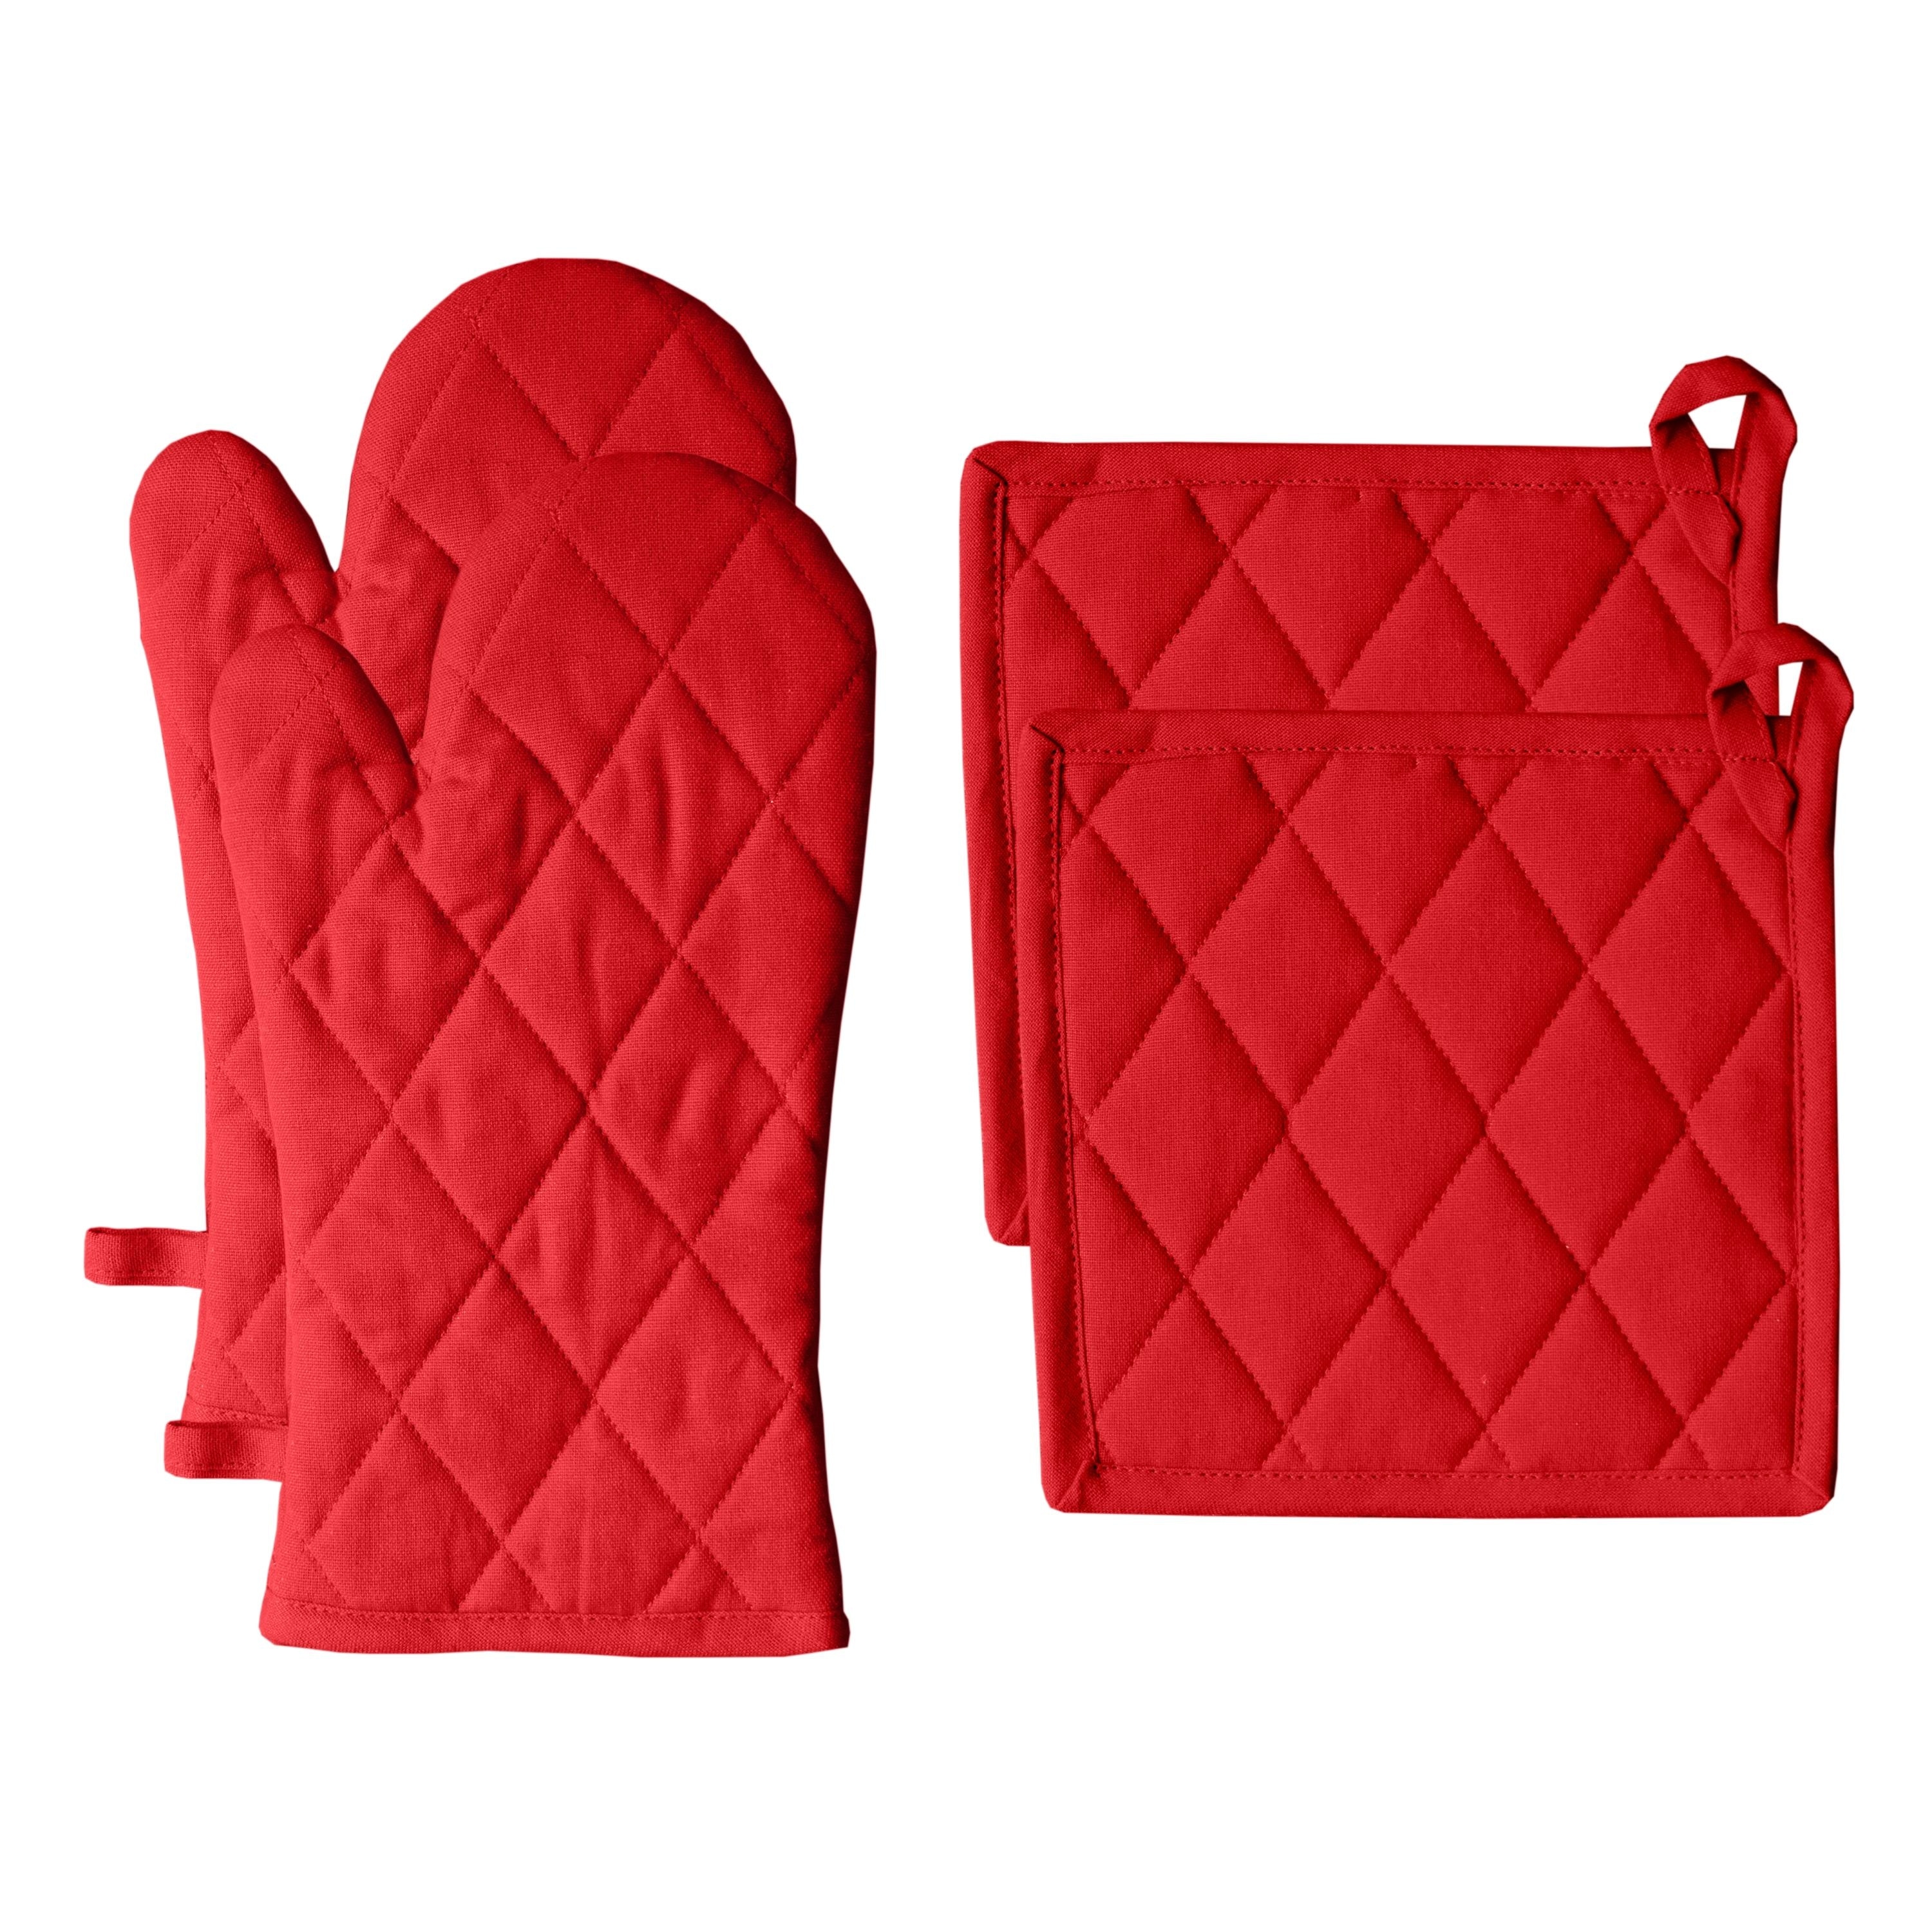 https://ak1.ostkcdn.com/images/products/is/images/direct/fd0bc49027683e645bc24d4f1b2a6d84d8bf7940/Fabstyles-Solo-Waffle-Cotton-Oven-Mitt-%26-Pot-Holder-Set-of-4.jpg